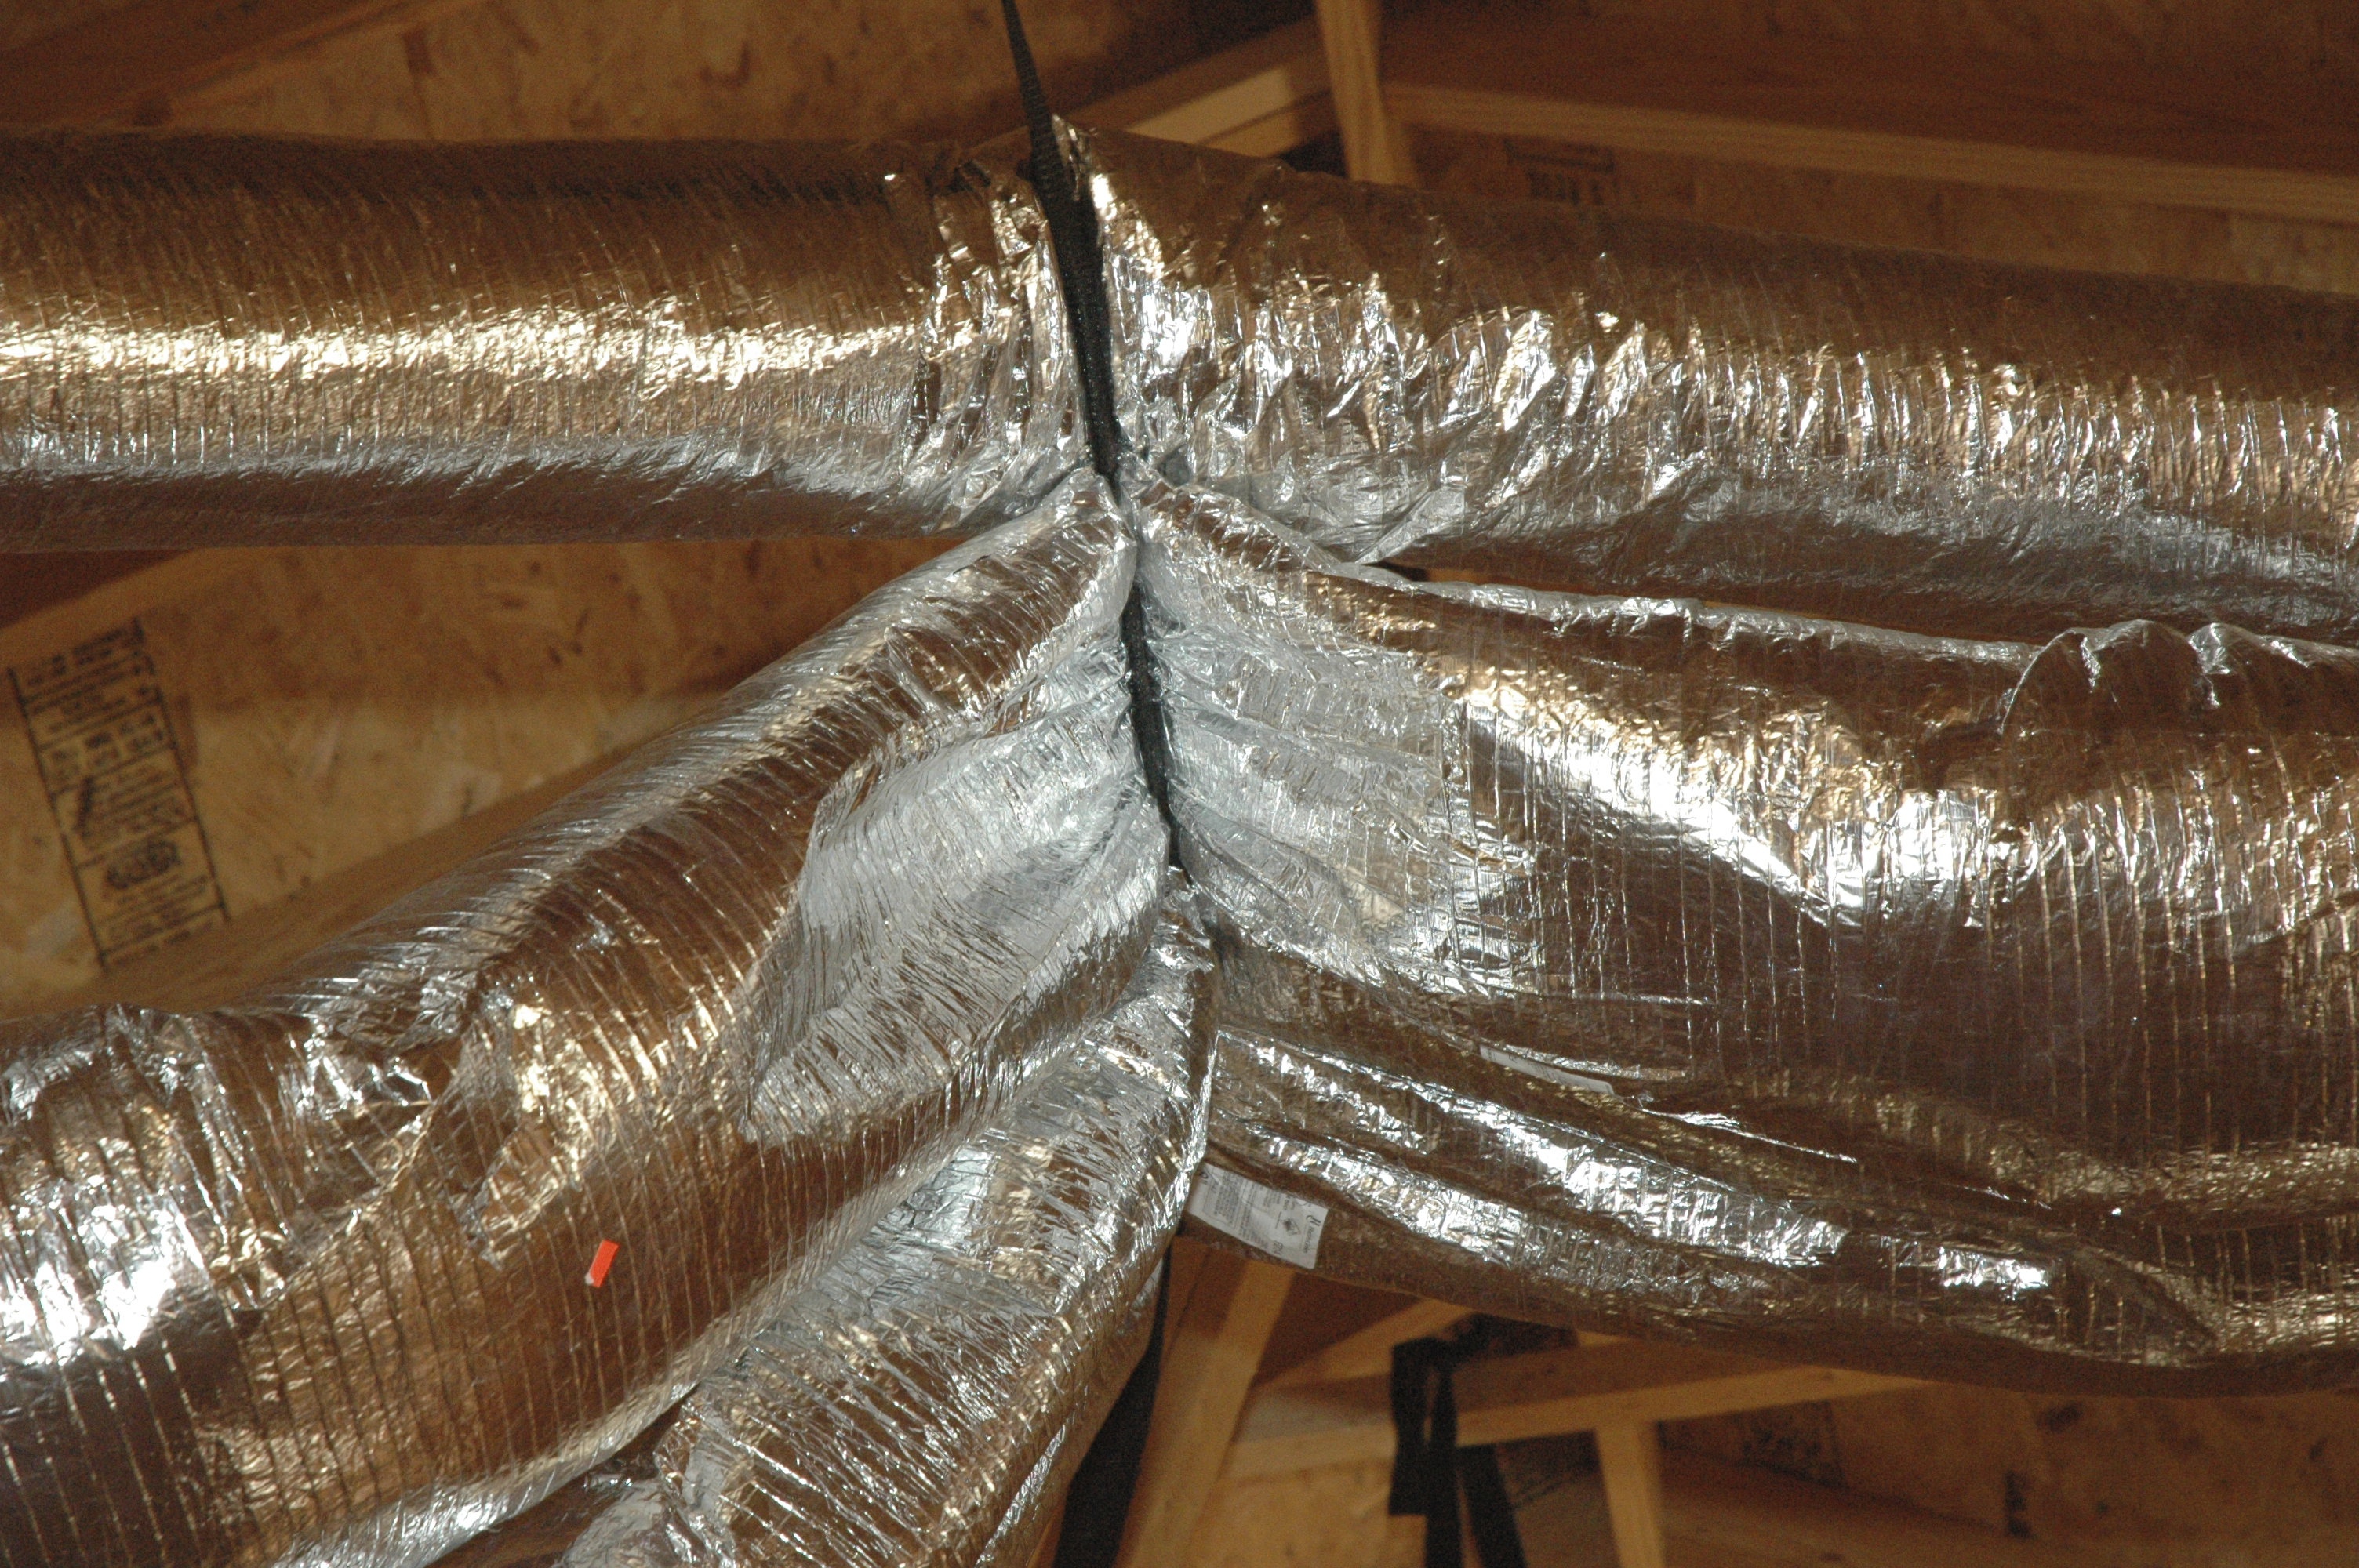 Plastic duct system that shows major bend that causes a air restriction and loss of heating and cooling in that line. Photo by Van Woody Realtor in Williamson County, TN. www.vanwoody.com